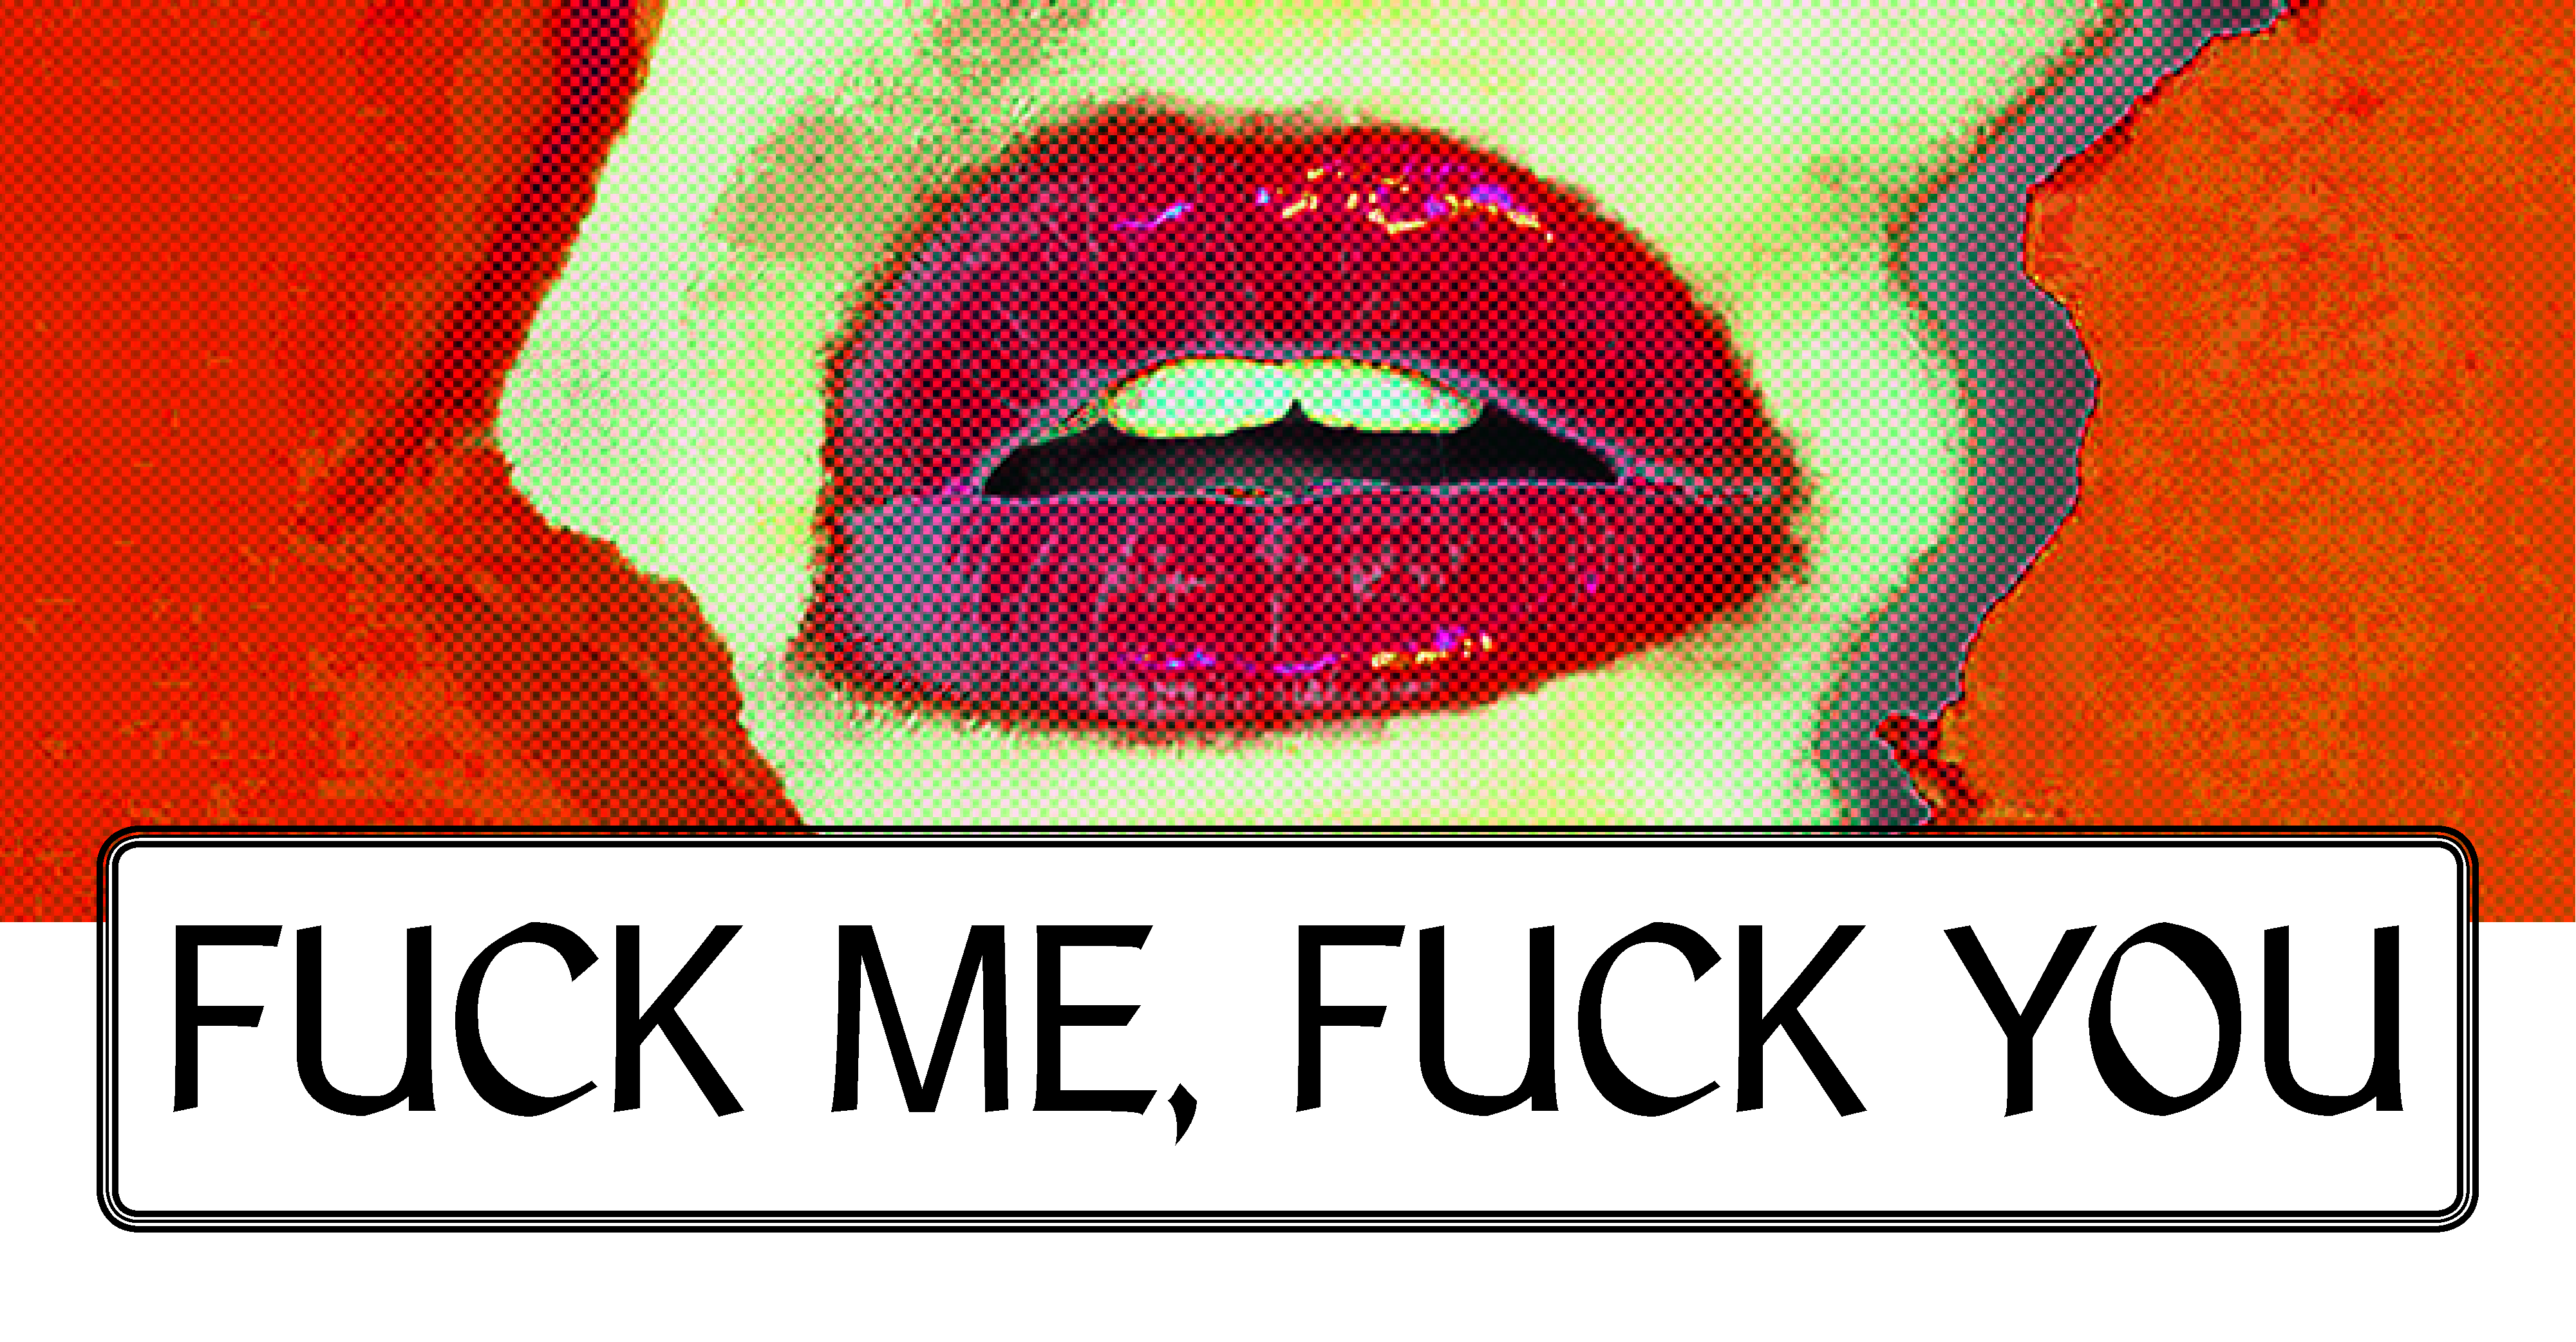 blake oneil recommends fuck me? fuck you pic